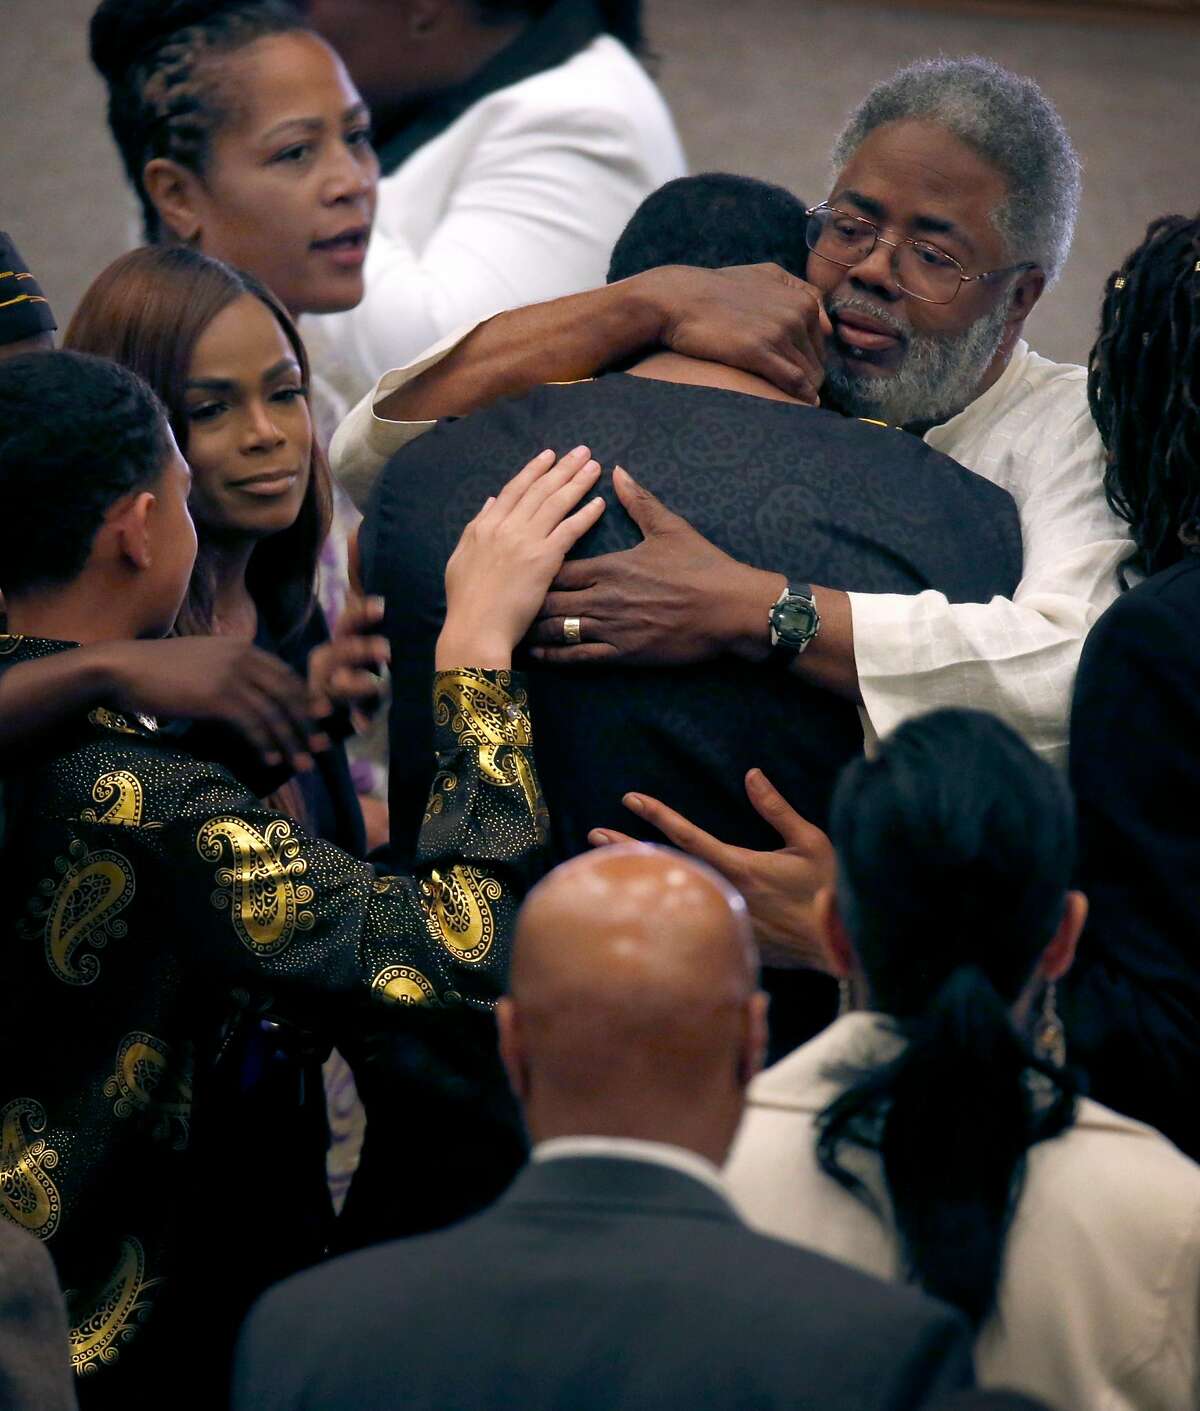 Oakland city council member Lynette Gibson McElhaney (top left) and her husband Clarence A. McElhaney Jr. (top right) console family friends at a memorial service and celebration of life for their son Victor McElhaney in Oakland, Calif. on Saturday, March 23, 2019. Victor McElhaney, 21, a music major at USC, was killed during a robbery in Los Angeles two weeks ago.